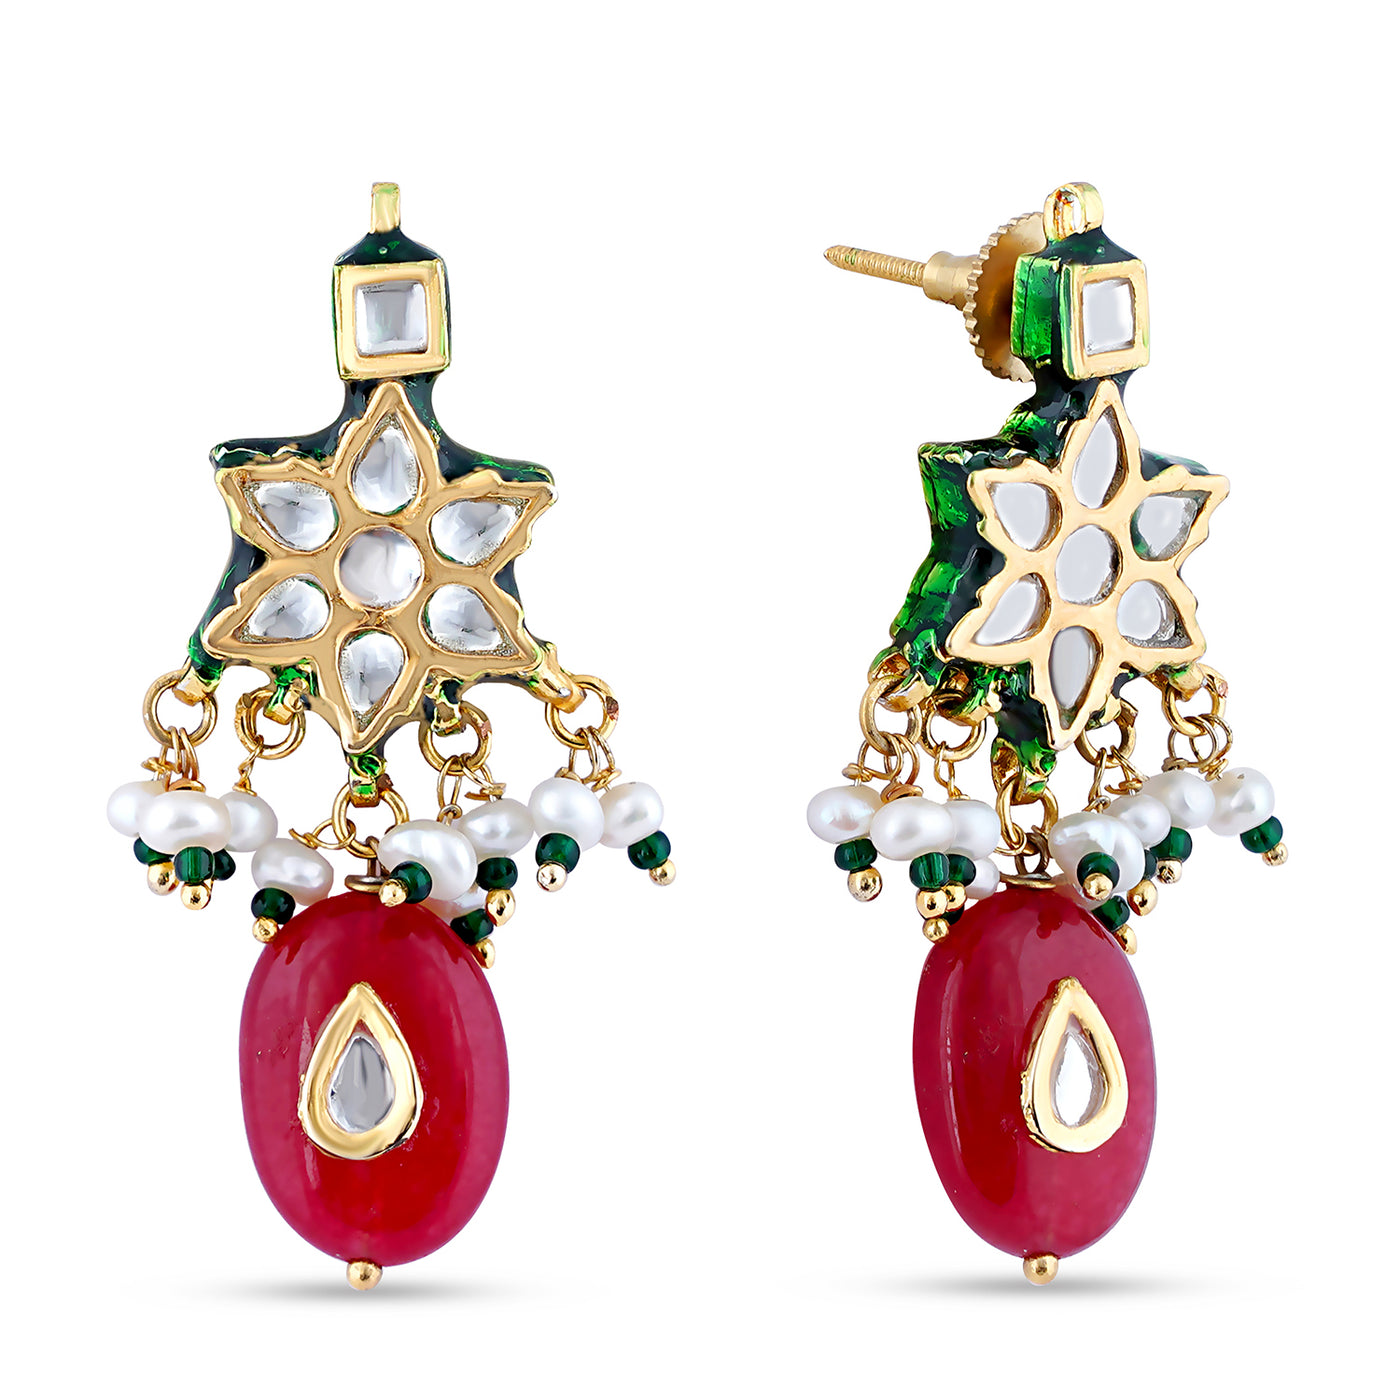 Star Shaped Red Drop Kundan Earrings. Front View and Side View.